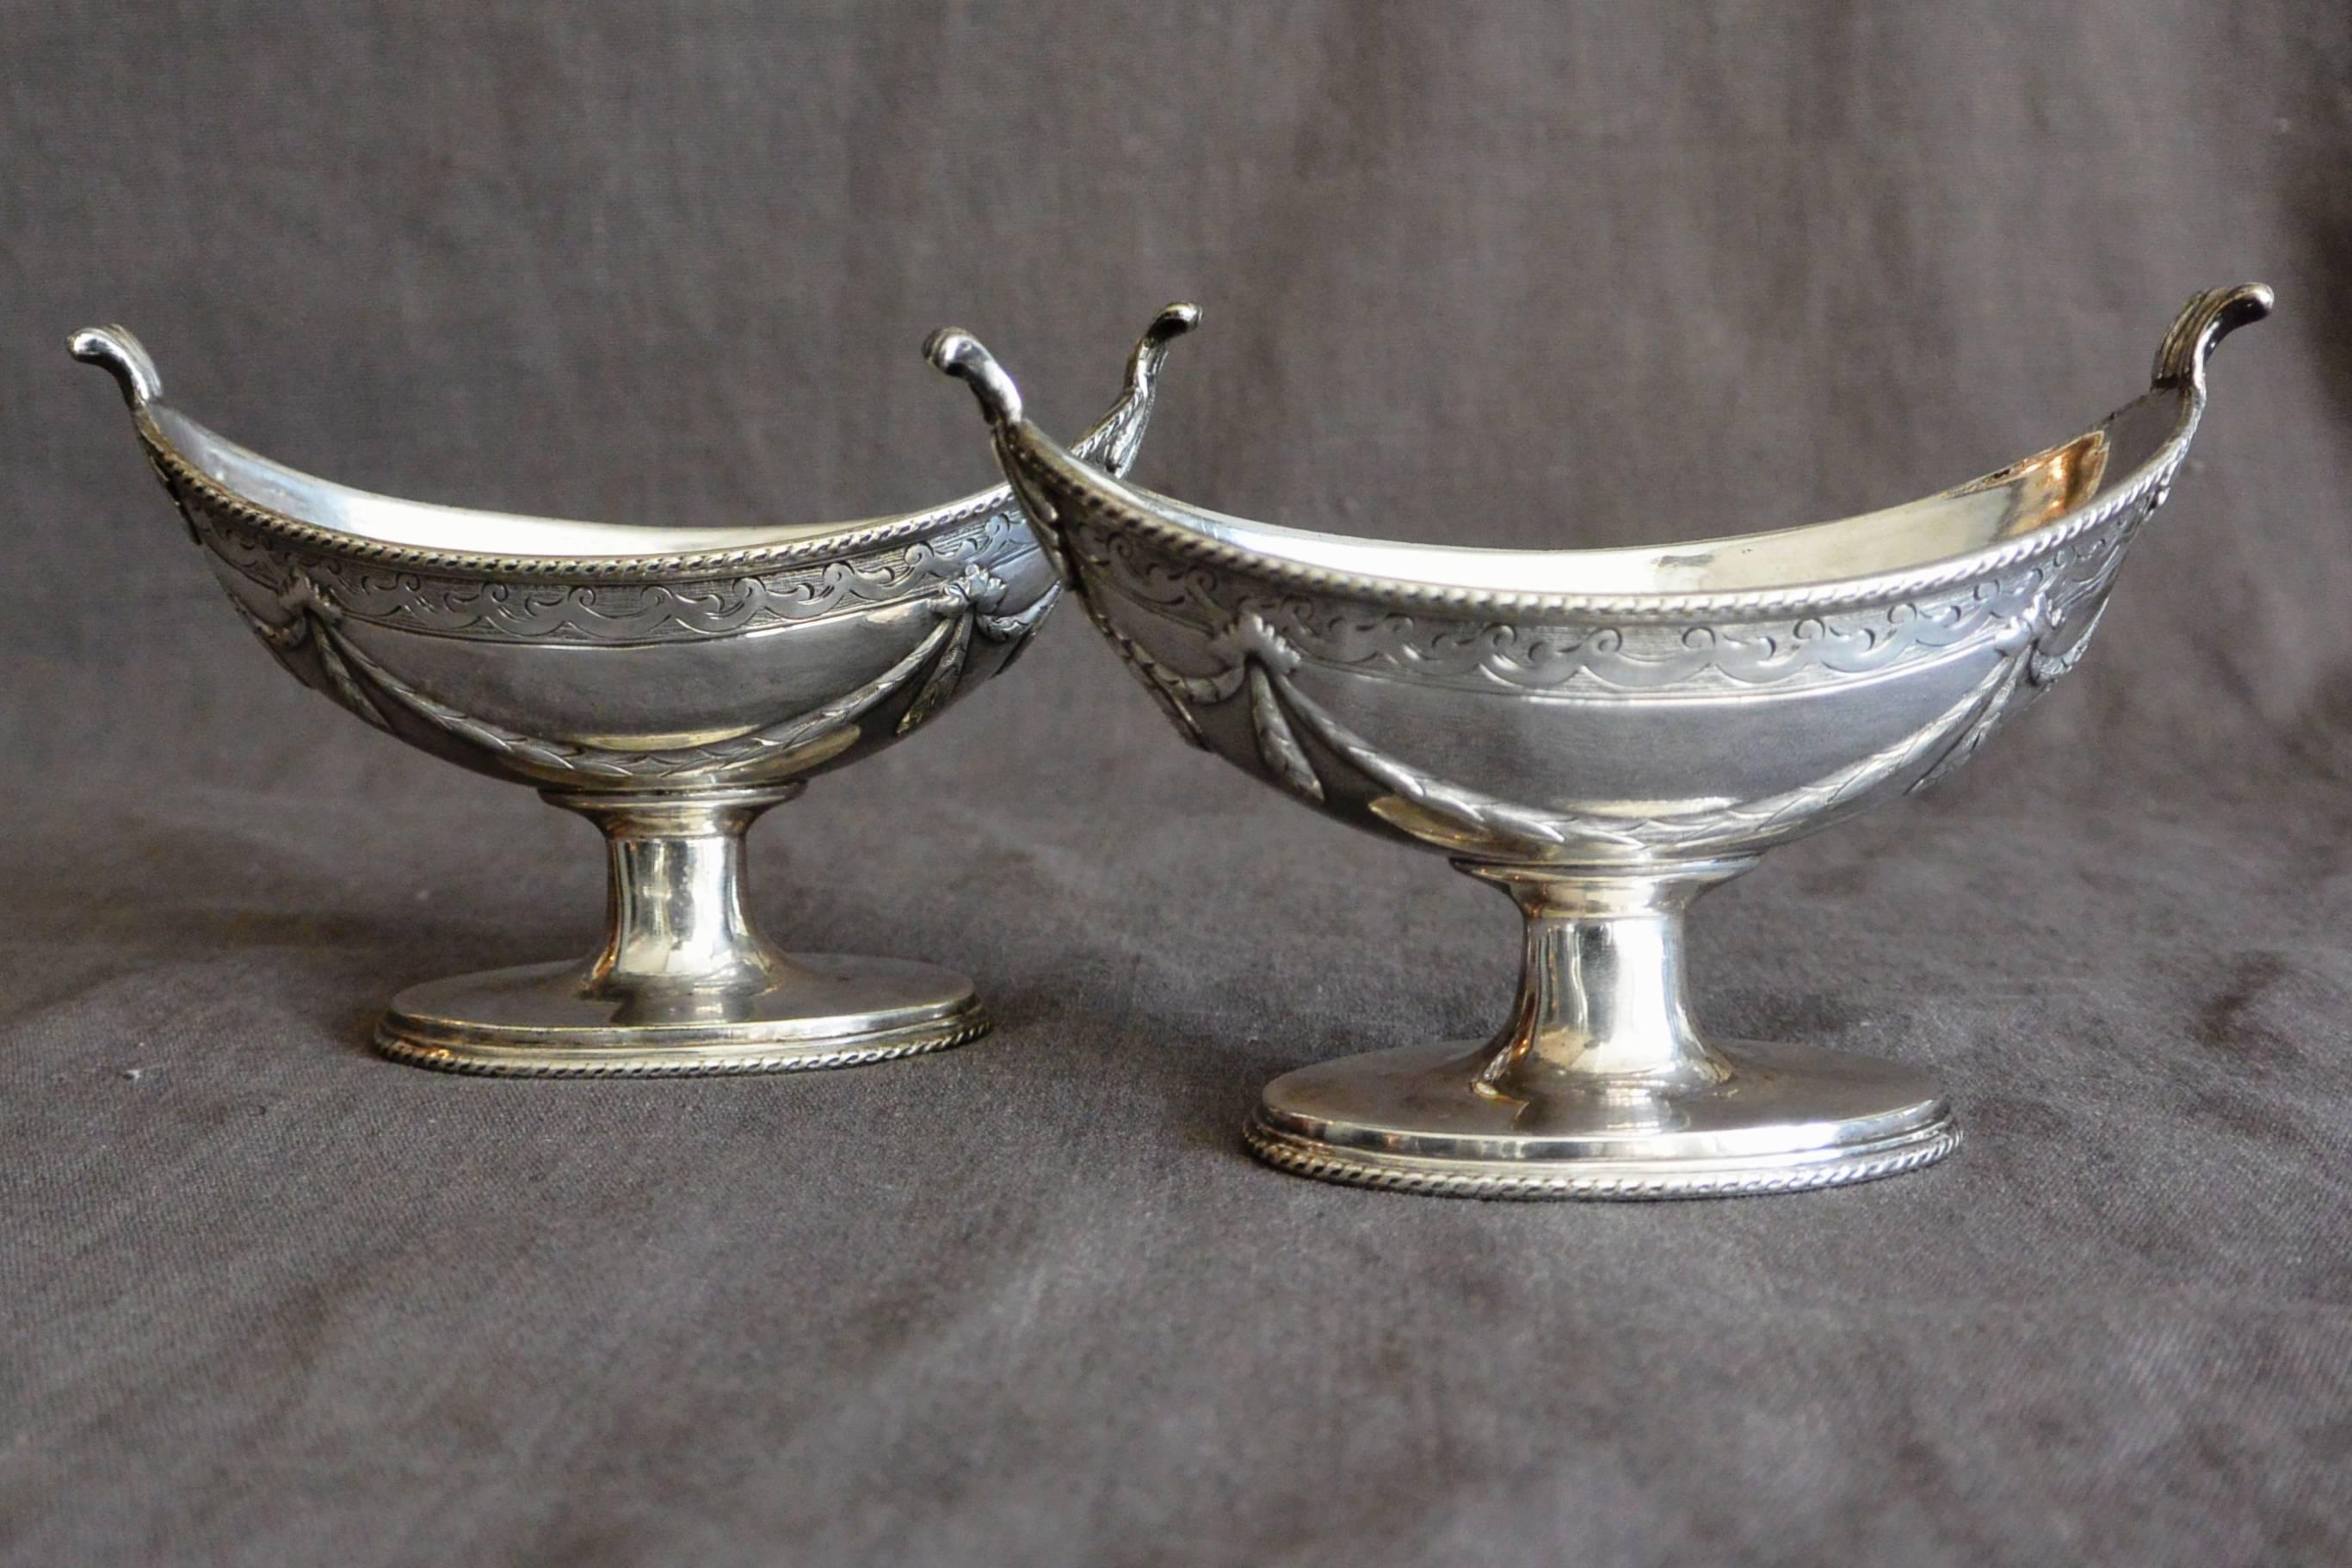 Pair English sterling silver bateau shaped salt cellars with incised roping detail at rim and base with swags and wreathing on oval pedestals. English hallmarks JAS DIXON & SONS Sheffield. Stamped PNS,#79
Dimension: 4.75